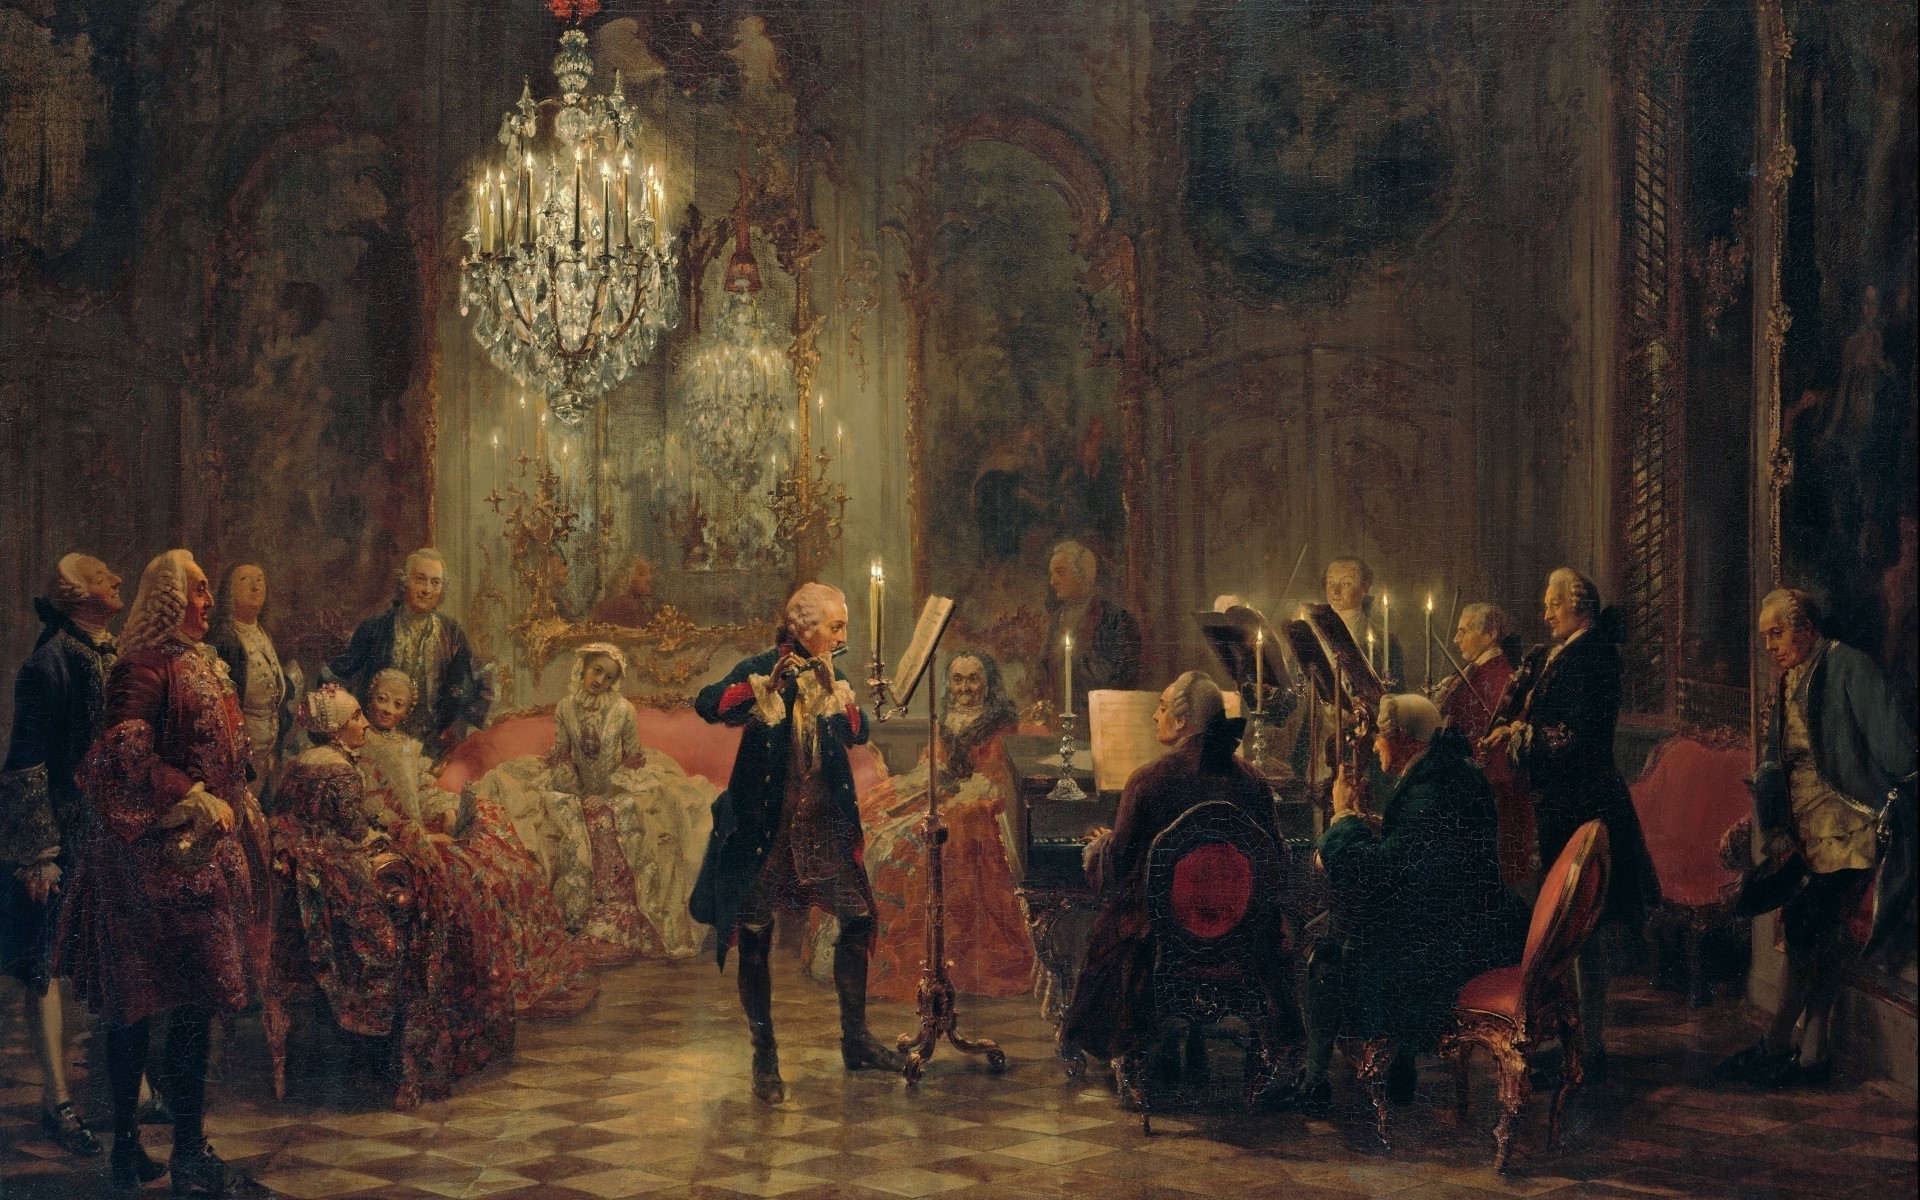 painting, Artwork, Prussia, Concerts, King, Oil painting, Classic art, Chandeliers, Musicians, Flute, Piano, Candles Wallpaper